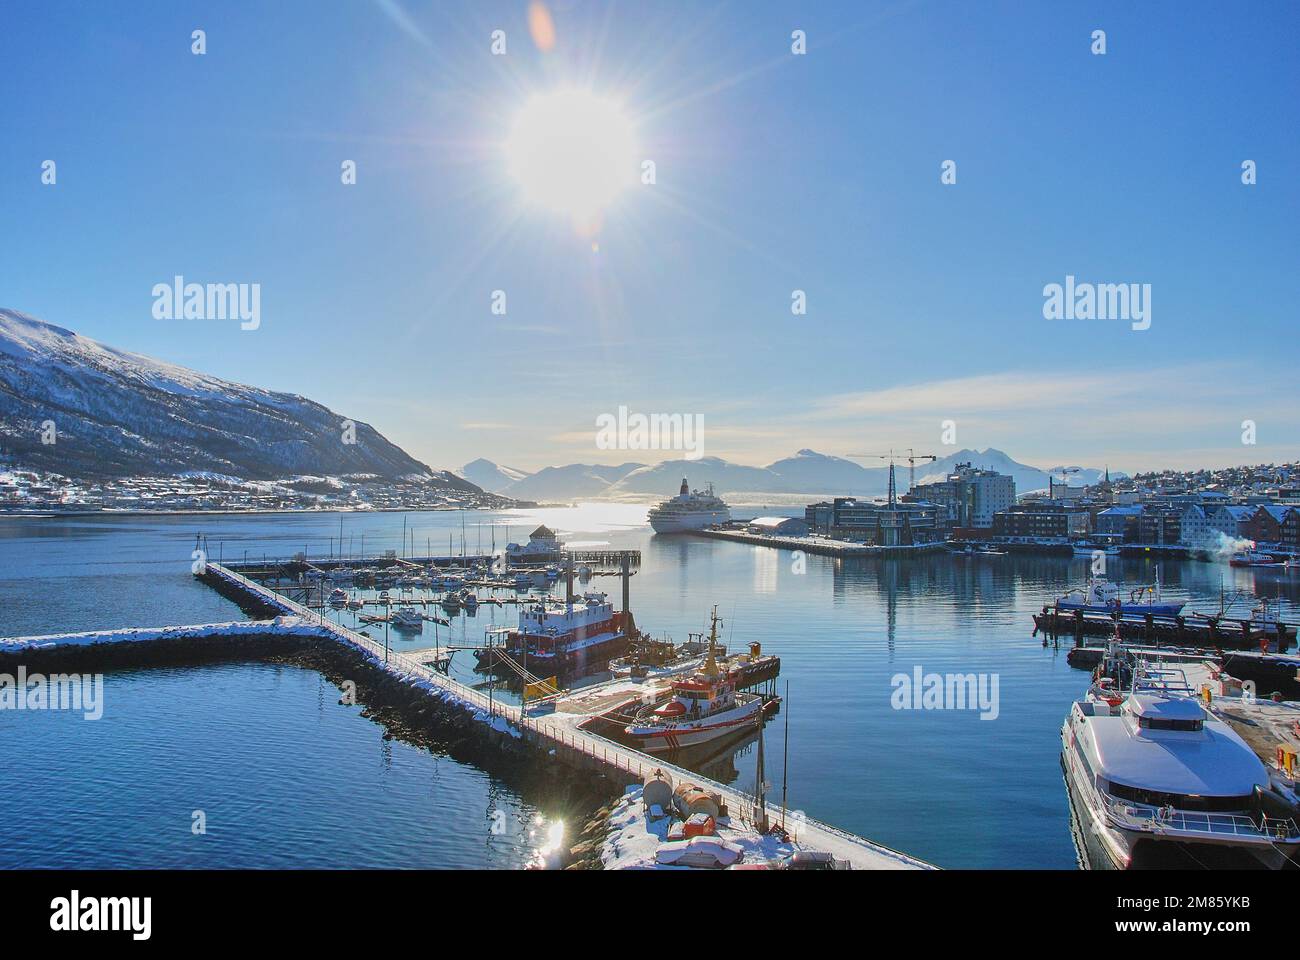 Cruise ship in the winter landscape of the port of Tromso in a fjord at the coastline of northern Norway with snow covered mountains in the background Stock Photo